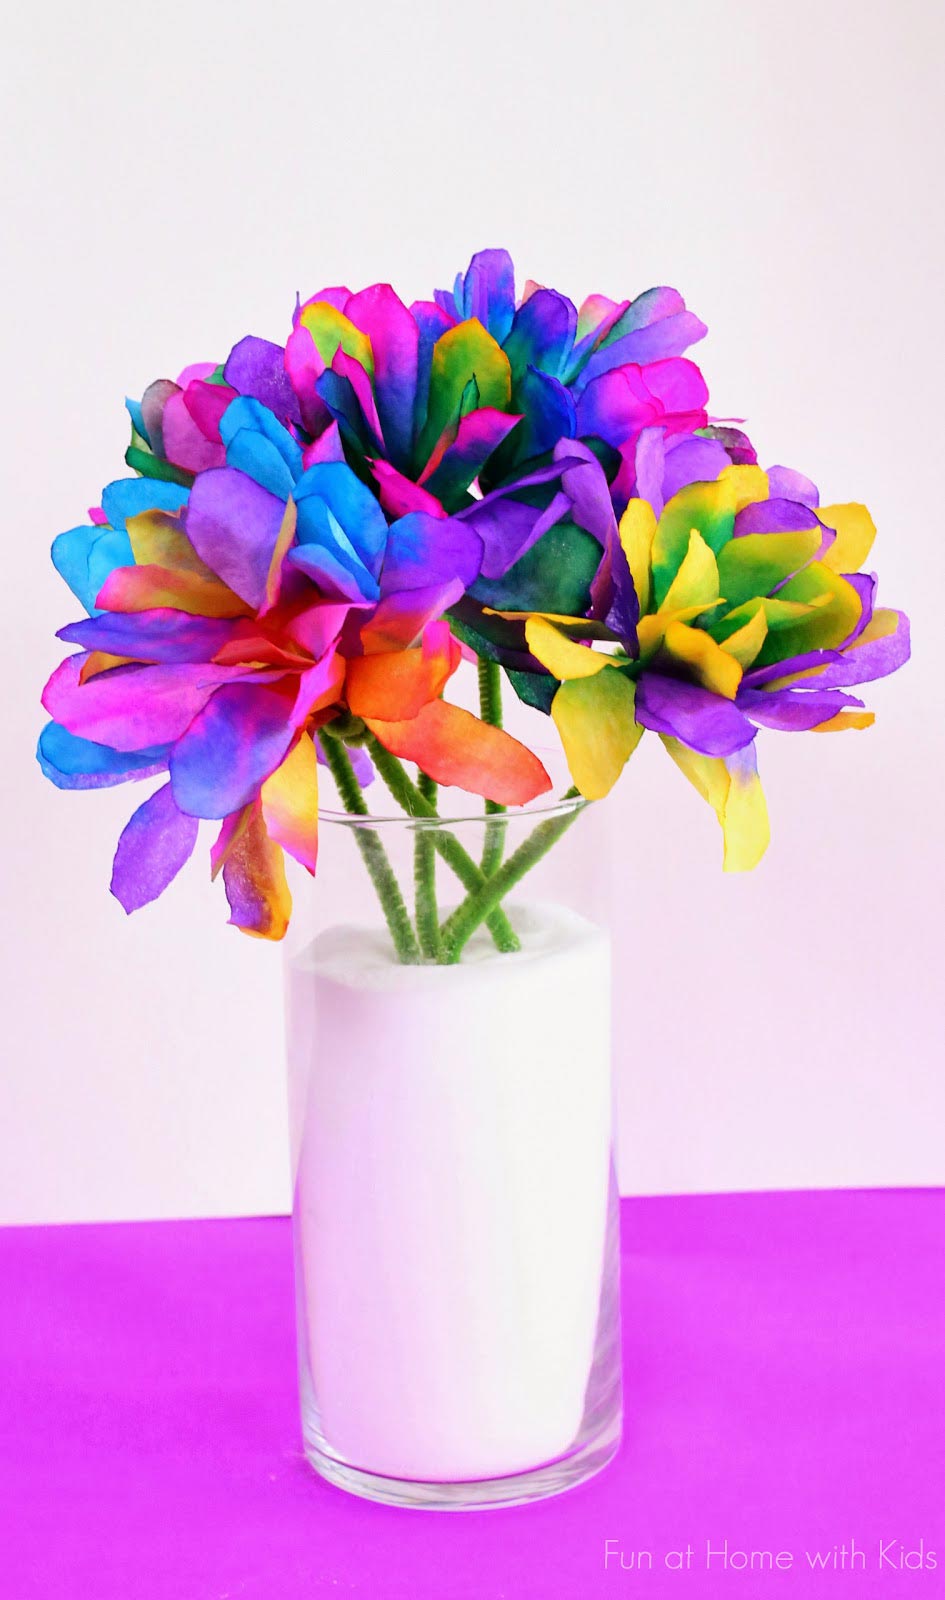 Vibrantly Colored Coffee Filter Flowers